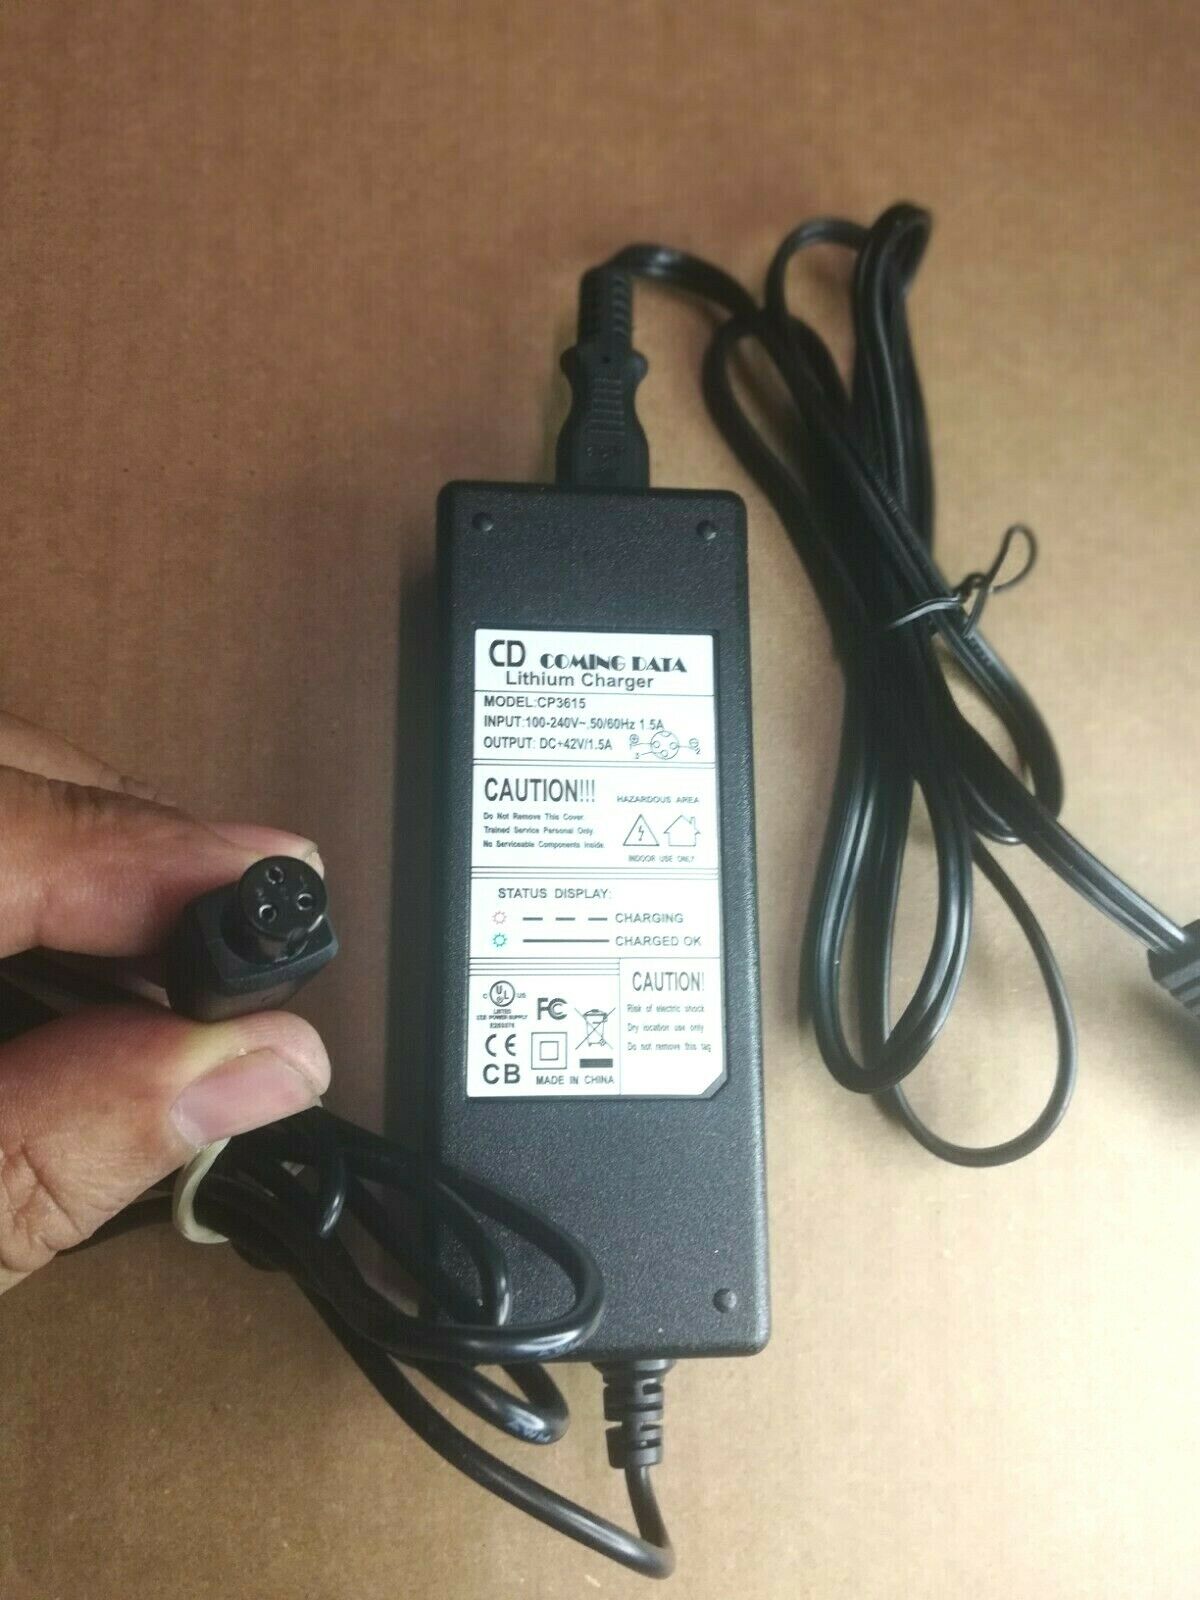 COMING DATA CD LITHIUM CHARGER CP3615 Input 100-240v .50/ 42V/1.5A Size: 3 pin Model: CP3615 Type: 42V/1.5A Color